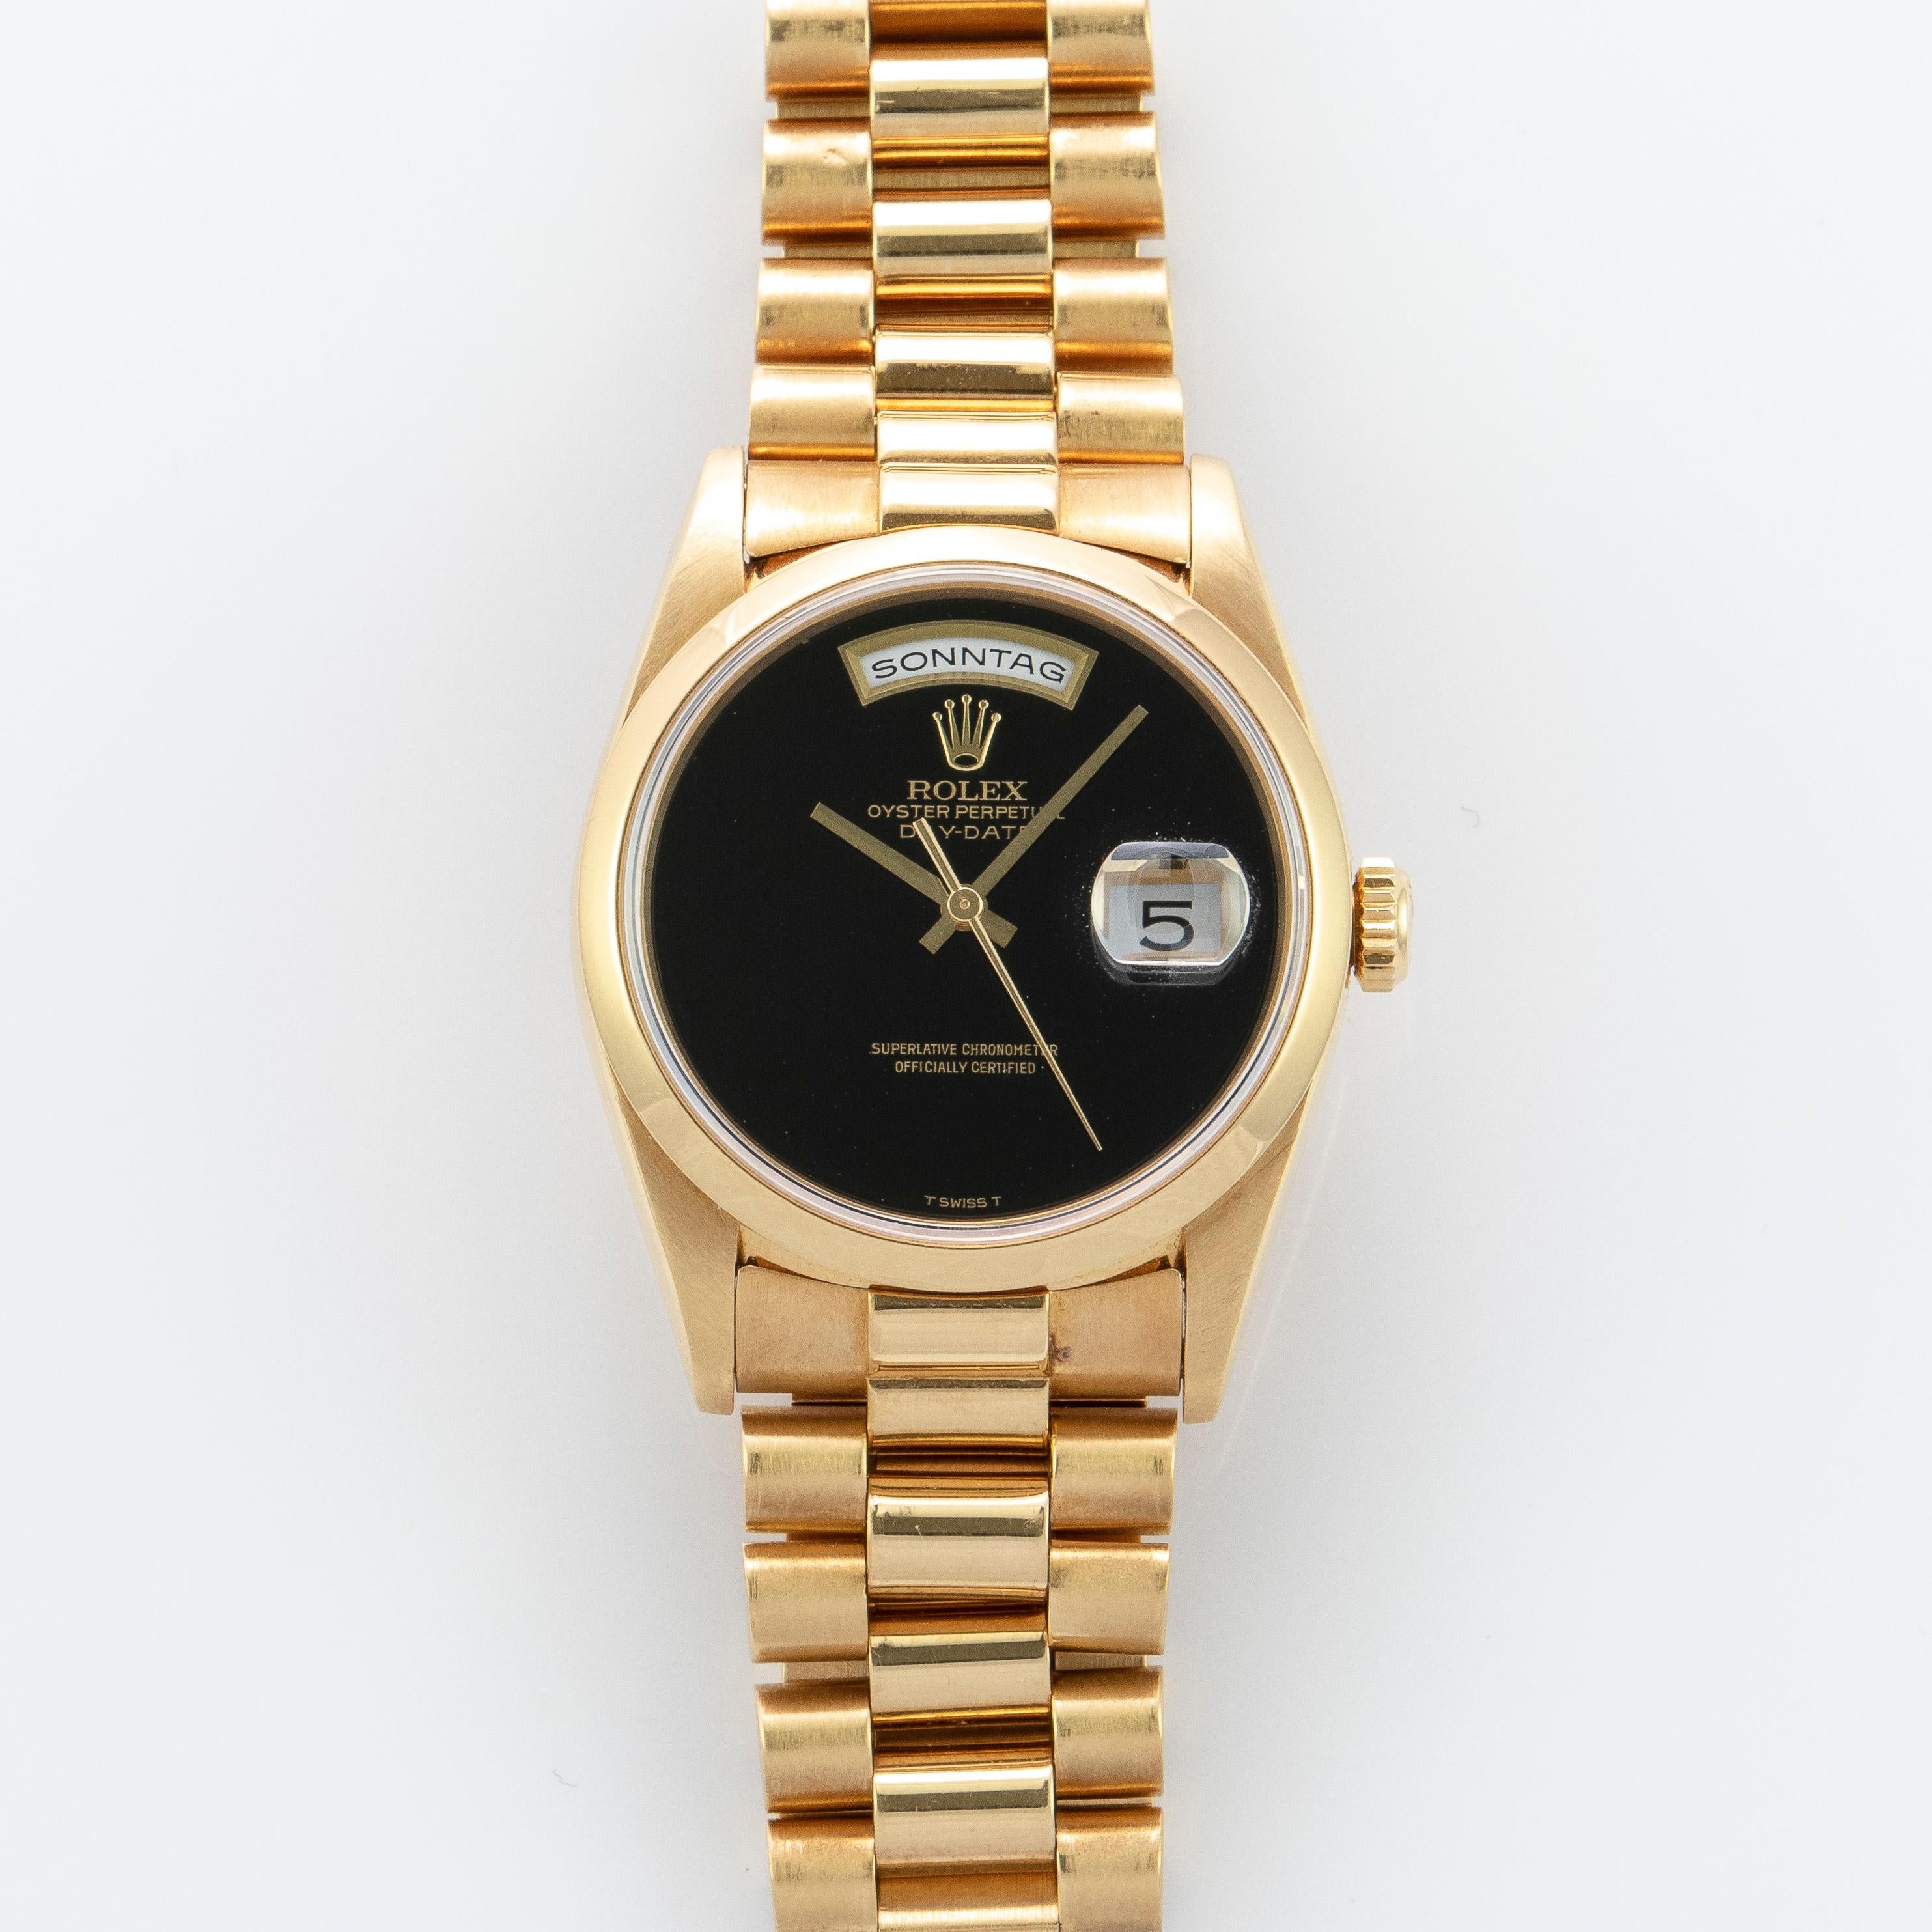 Rolex 18K Yellow Gold Day-Date Presidential Watch
Rare Factory Rolex Black Onyx T Swiss T Dial Without Hour Markers
Onyx Eye Is One Of The Rarest Rolex Stone Dials Produced
Very Unusual and Rare Dial
Rare Smooth Bezel Reference
From 1990's
18K